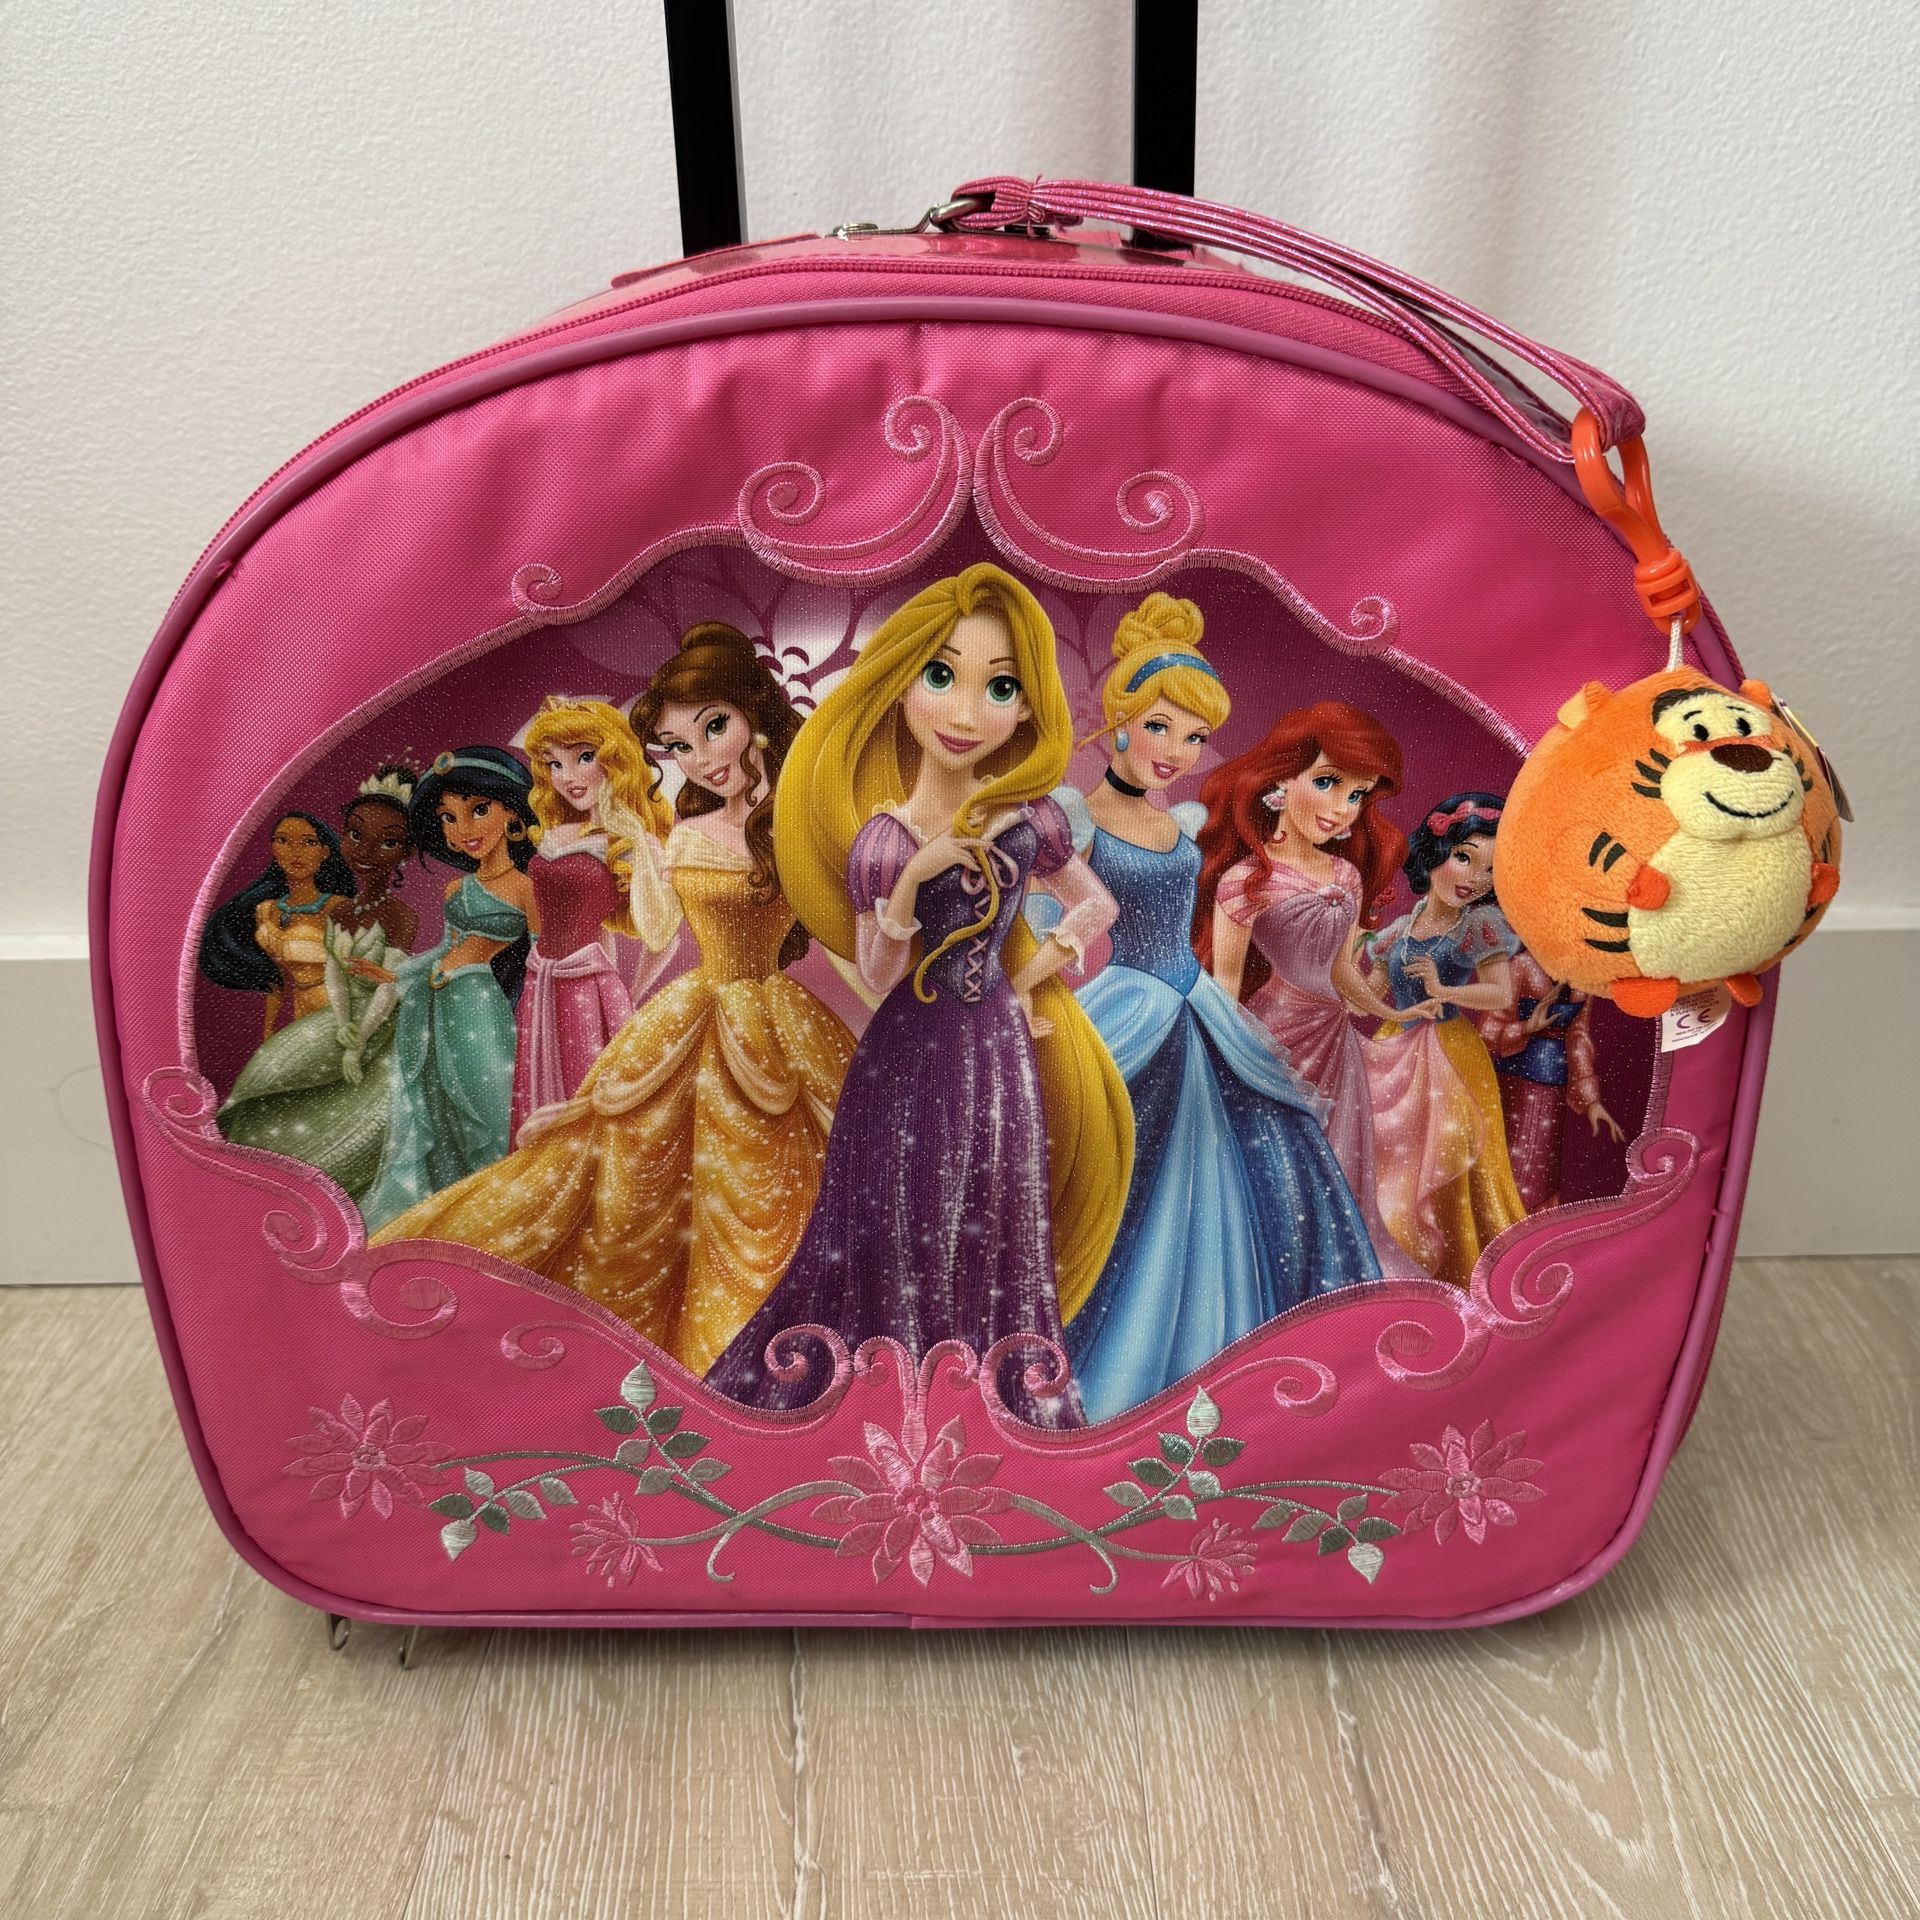 Disney Store Disney Princess Rolling Luggage/Carry-on Suitcase Extending Handle